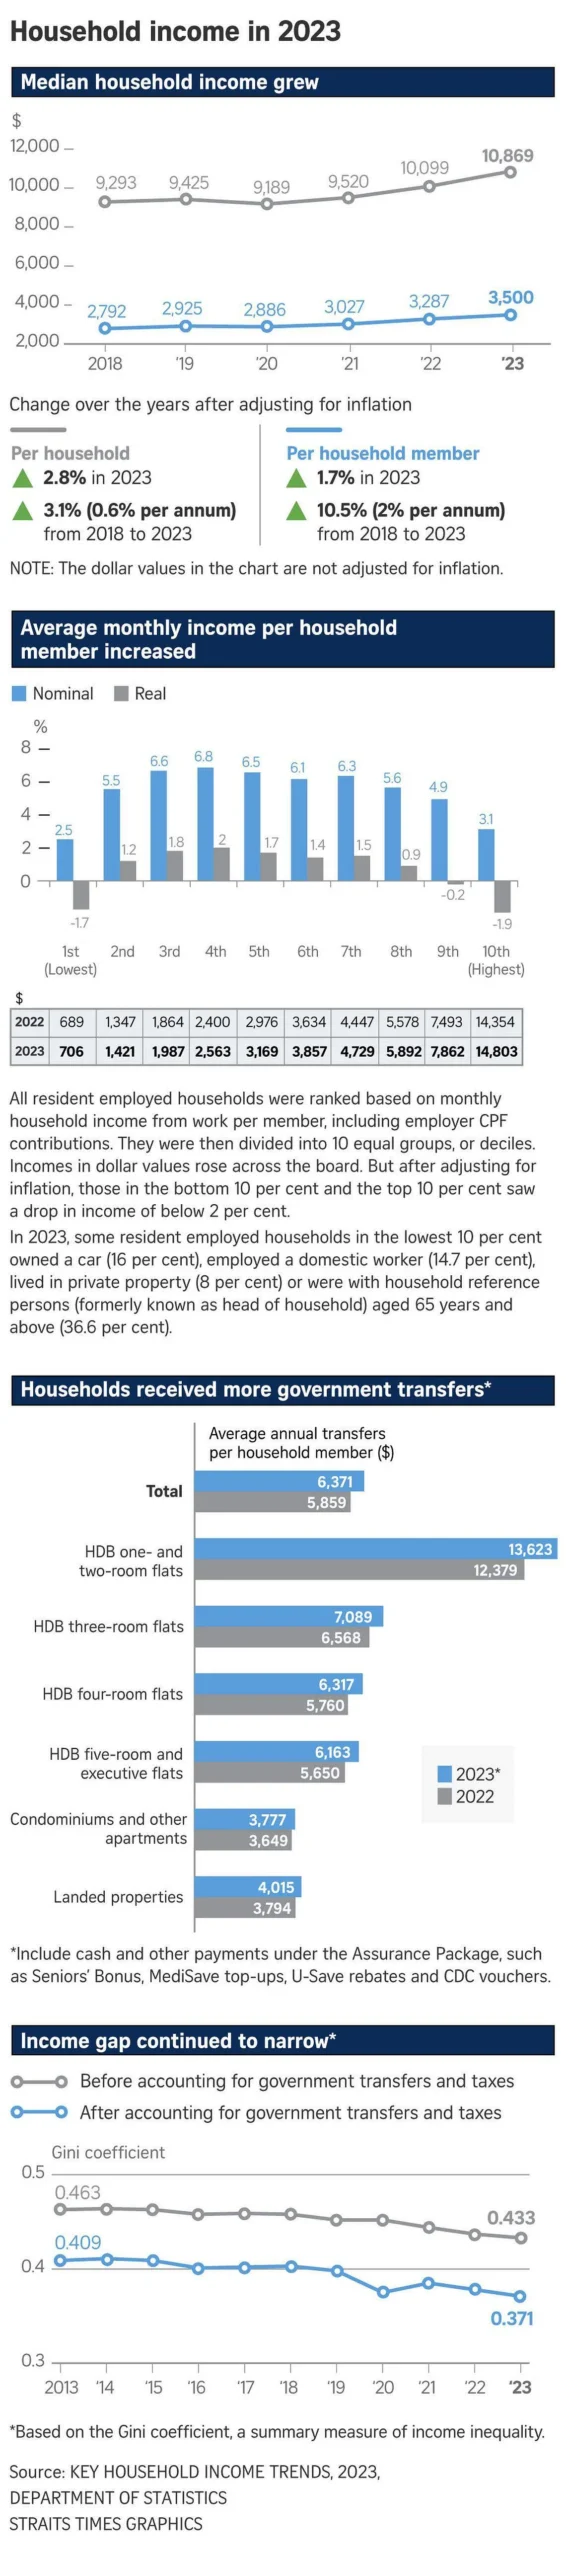 The Straits Times Household Income Increase